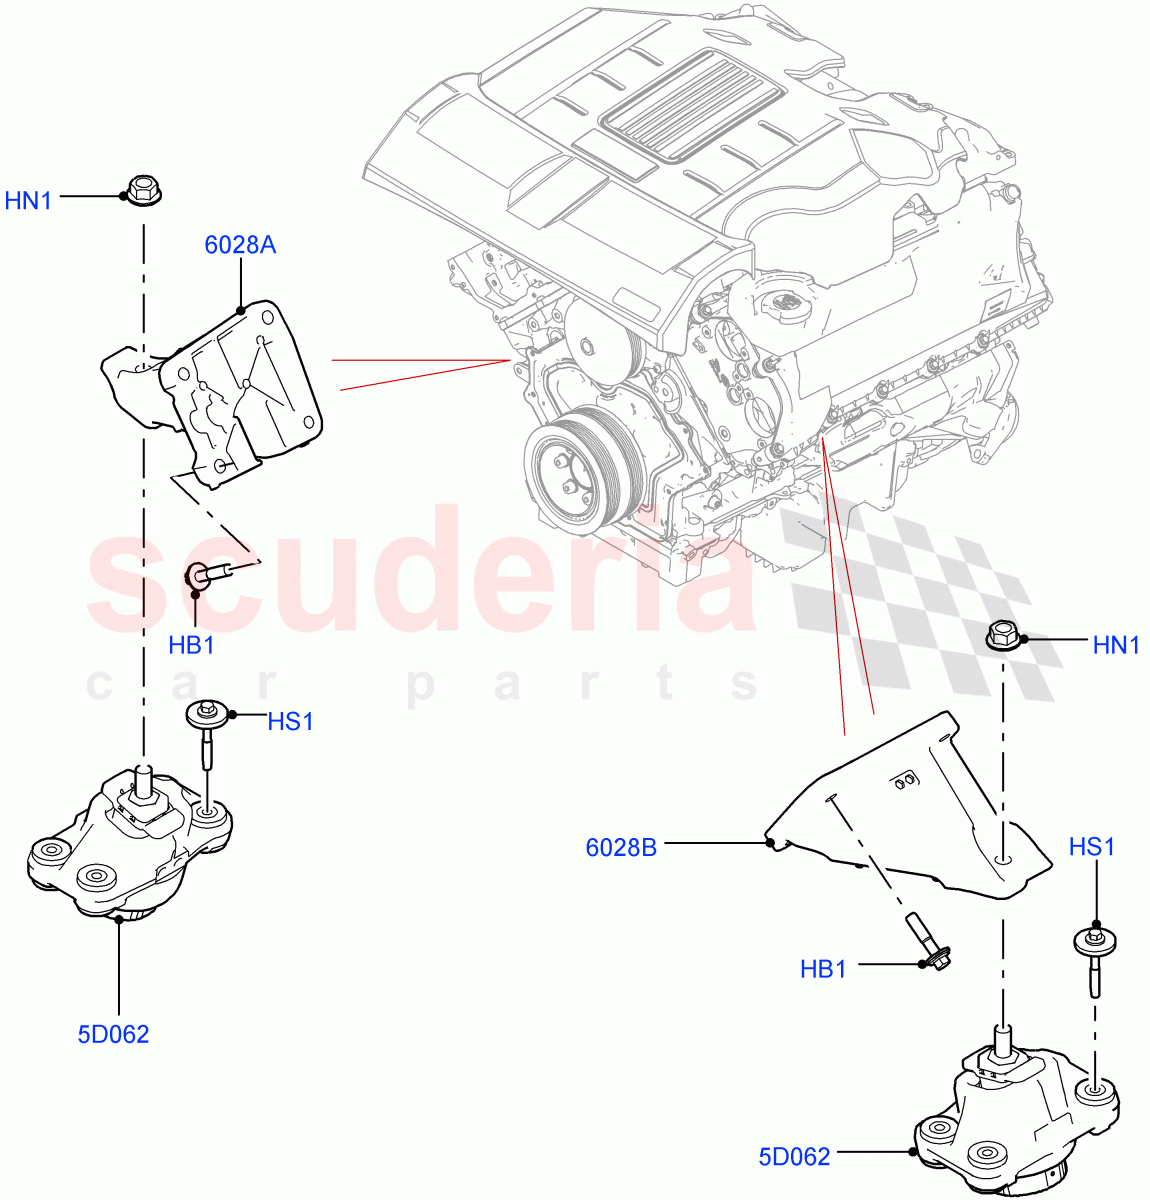 Engine Mounting(Solihull Plant Build)(3.0L DOHC GDI SC V6 PETROL)((V)FROMHA000001) of Land Rover Land Rover Discovery 5 (2017+) [3.0 I6 Turbo Petrol AJ20P6]